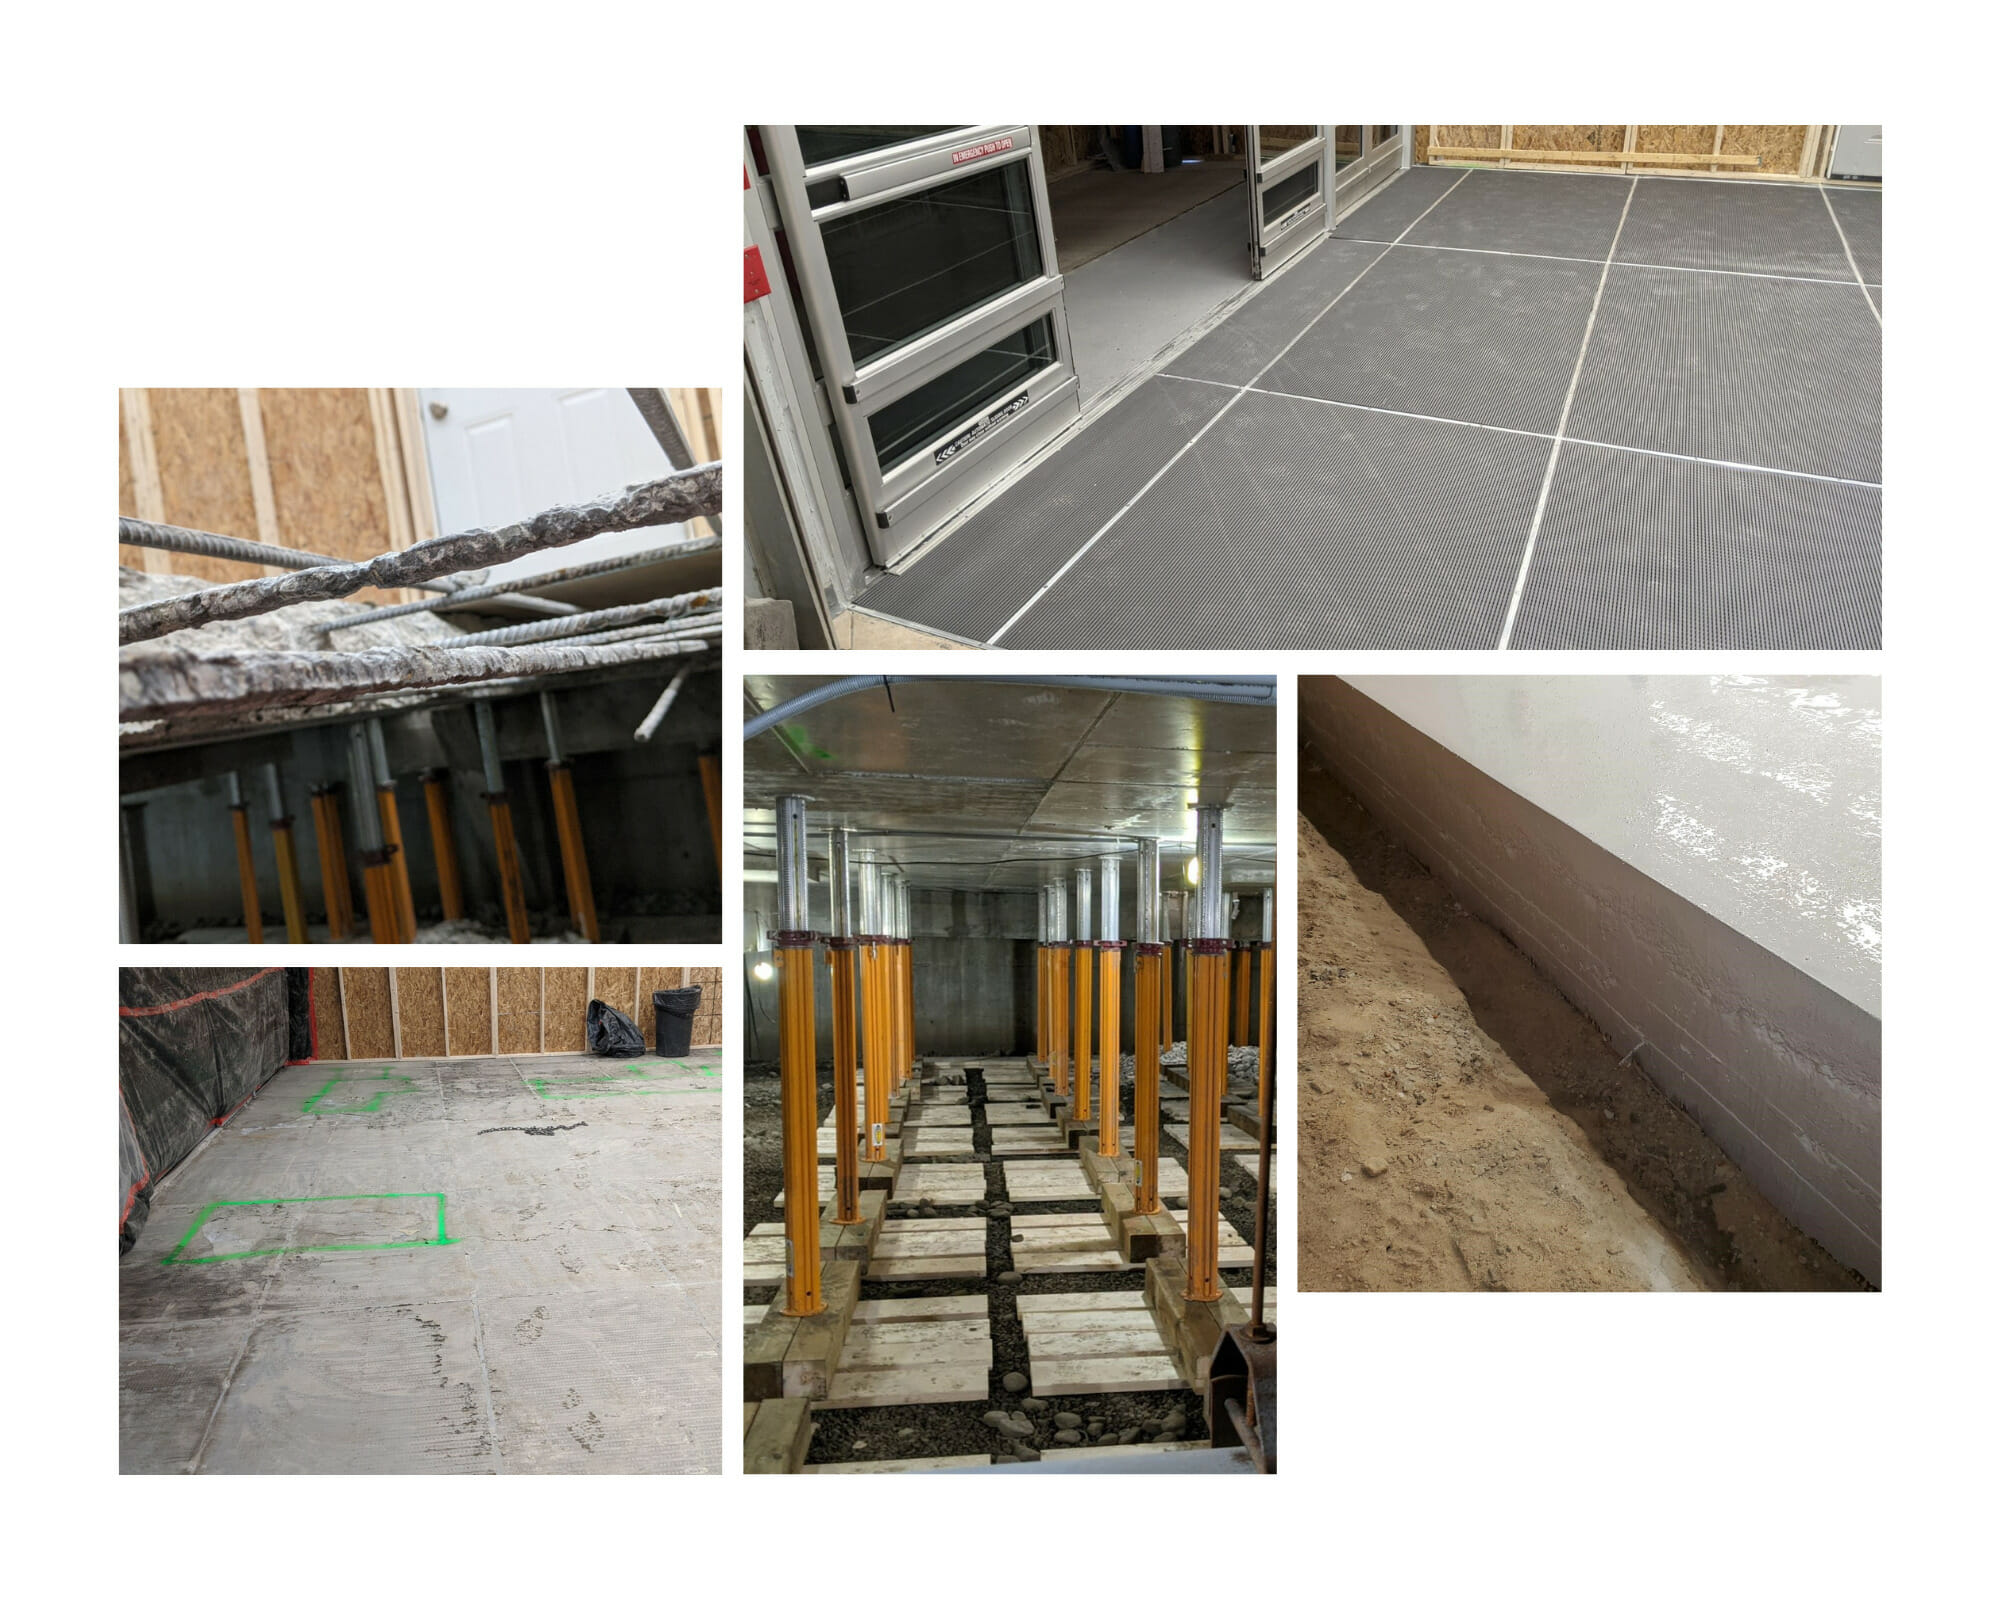 A collage of photos showing the installation of a concrete floor.